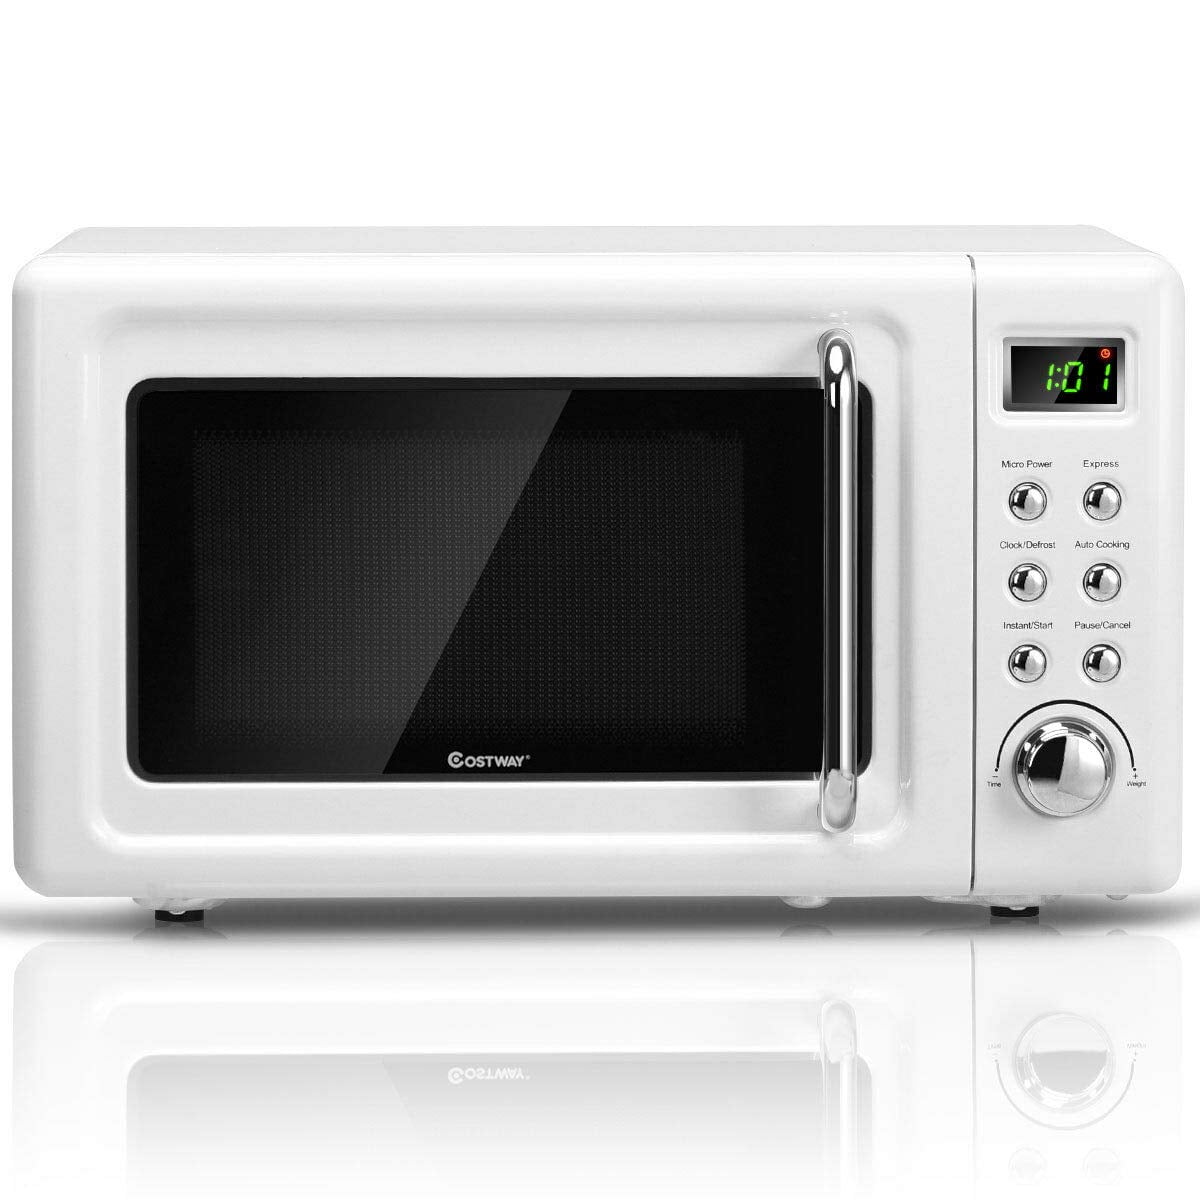 Haden 75030 Cotswold Retro 0.7 Cu Ft 700W Countertop Microwave Oven Blue 